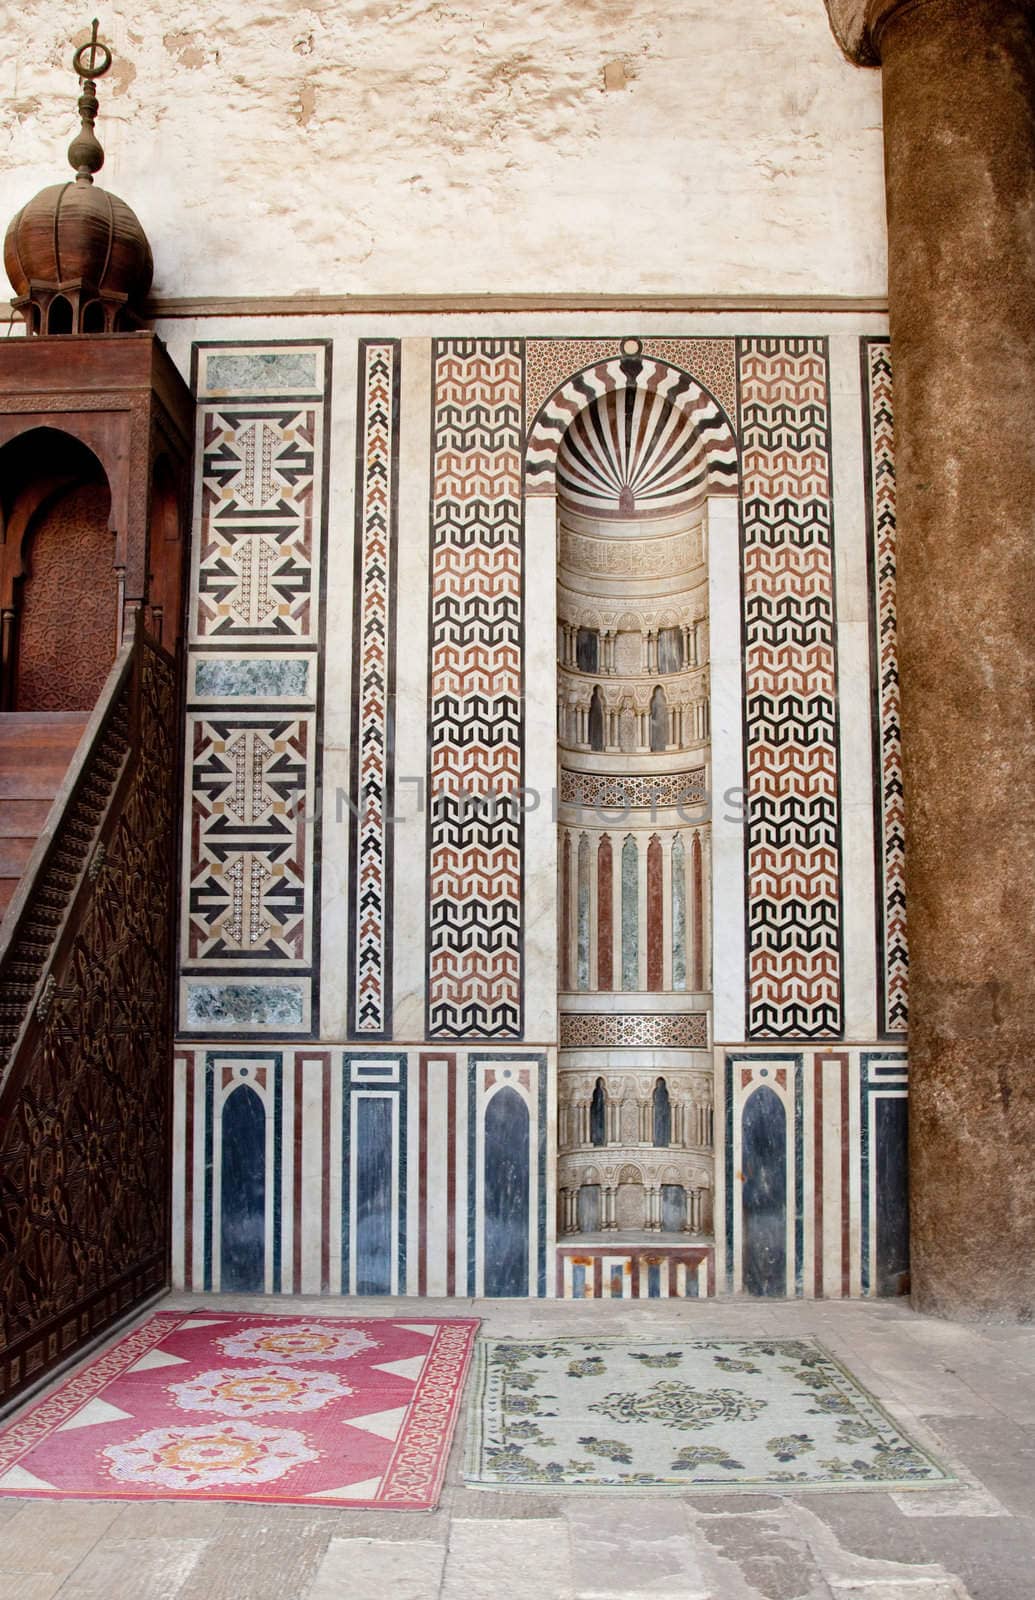 Decorated areas facing mecca in the Citadel Cairo by steheap